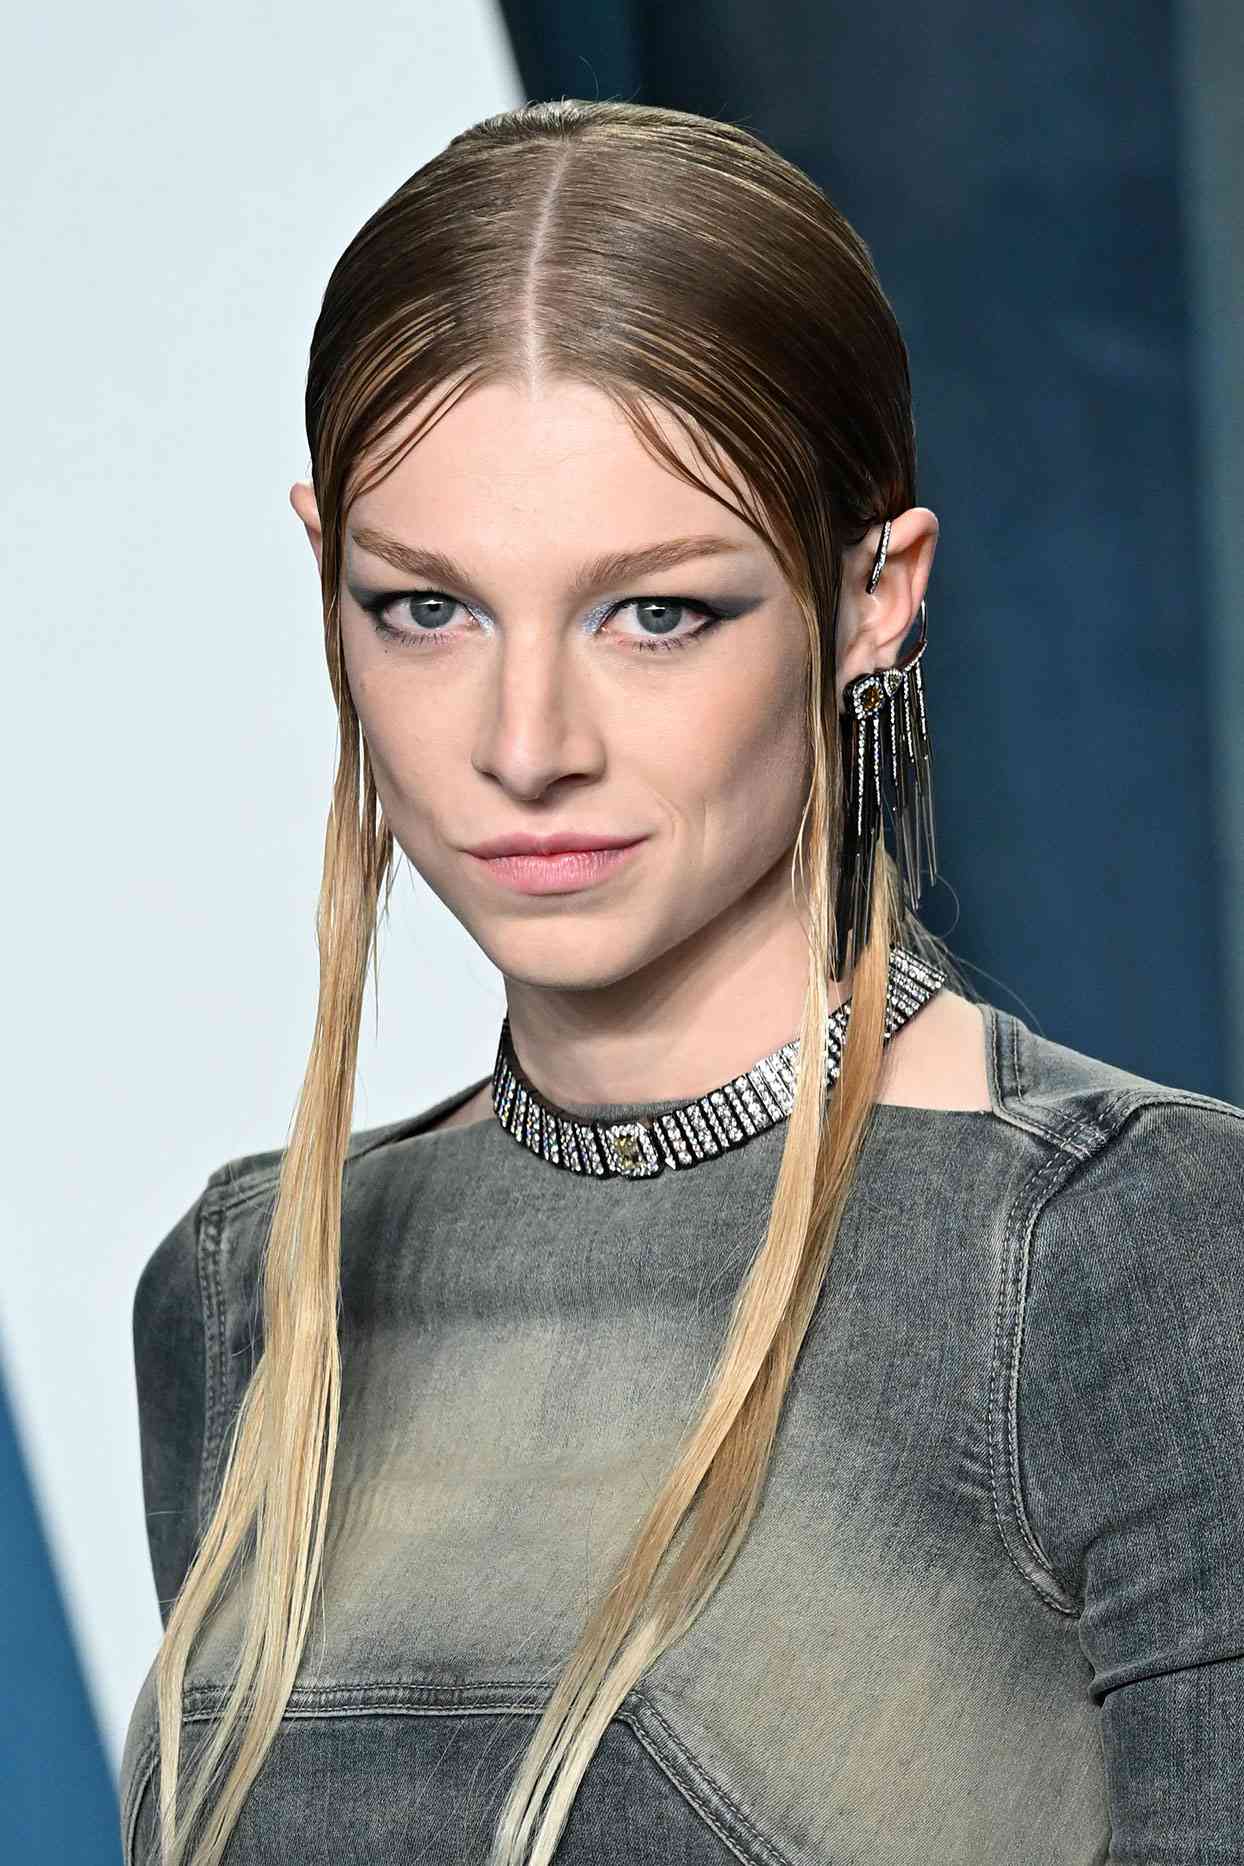 Mid-parted Long and Sleek Hair with Side Fringes